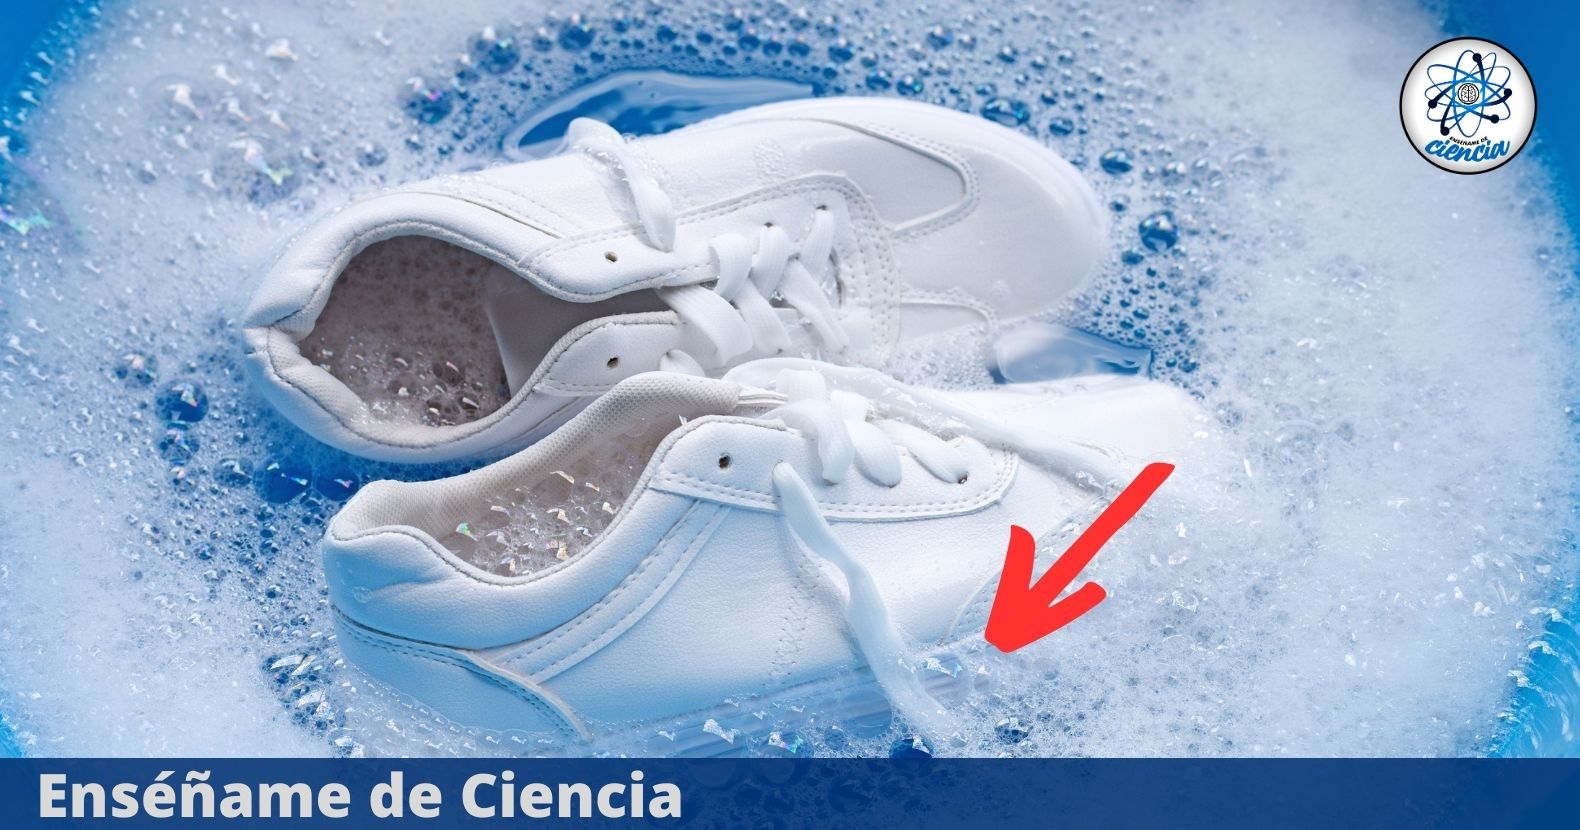 The ideal product to permanently whiten the soles of tennis shoes without rubbing – Enséñame de Ciencia